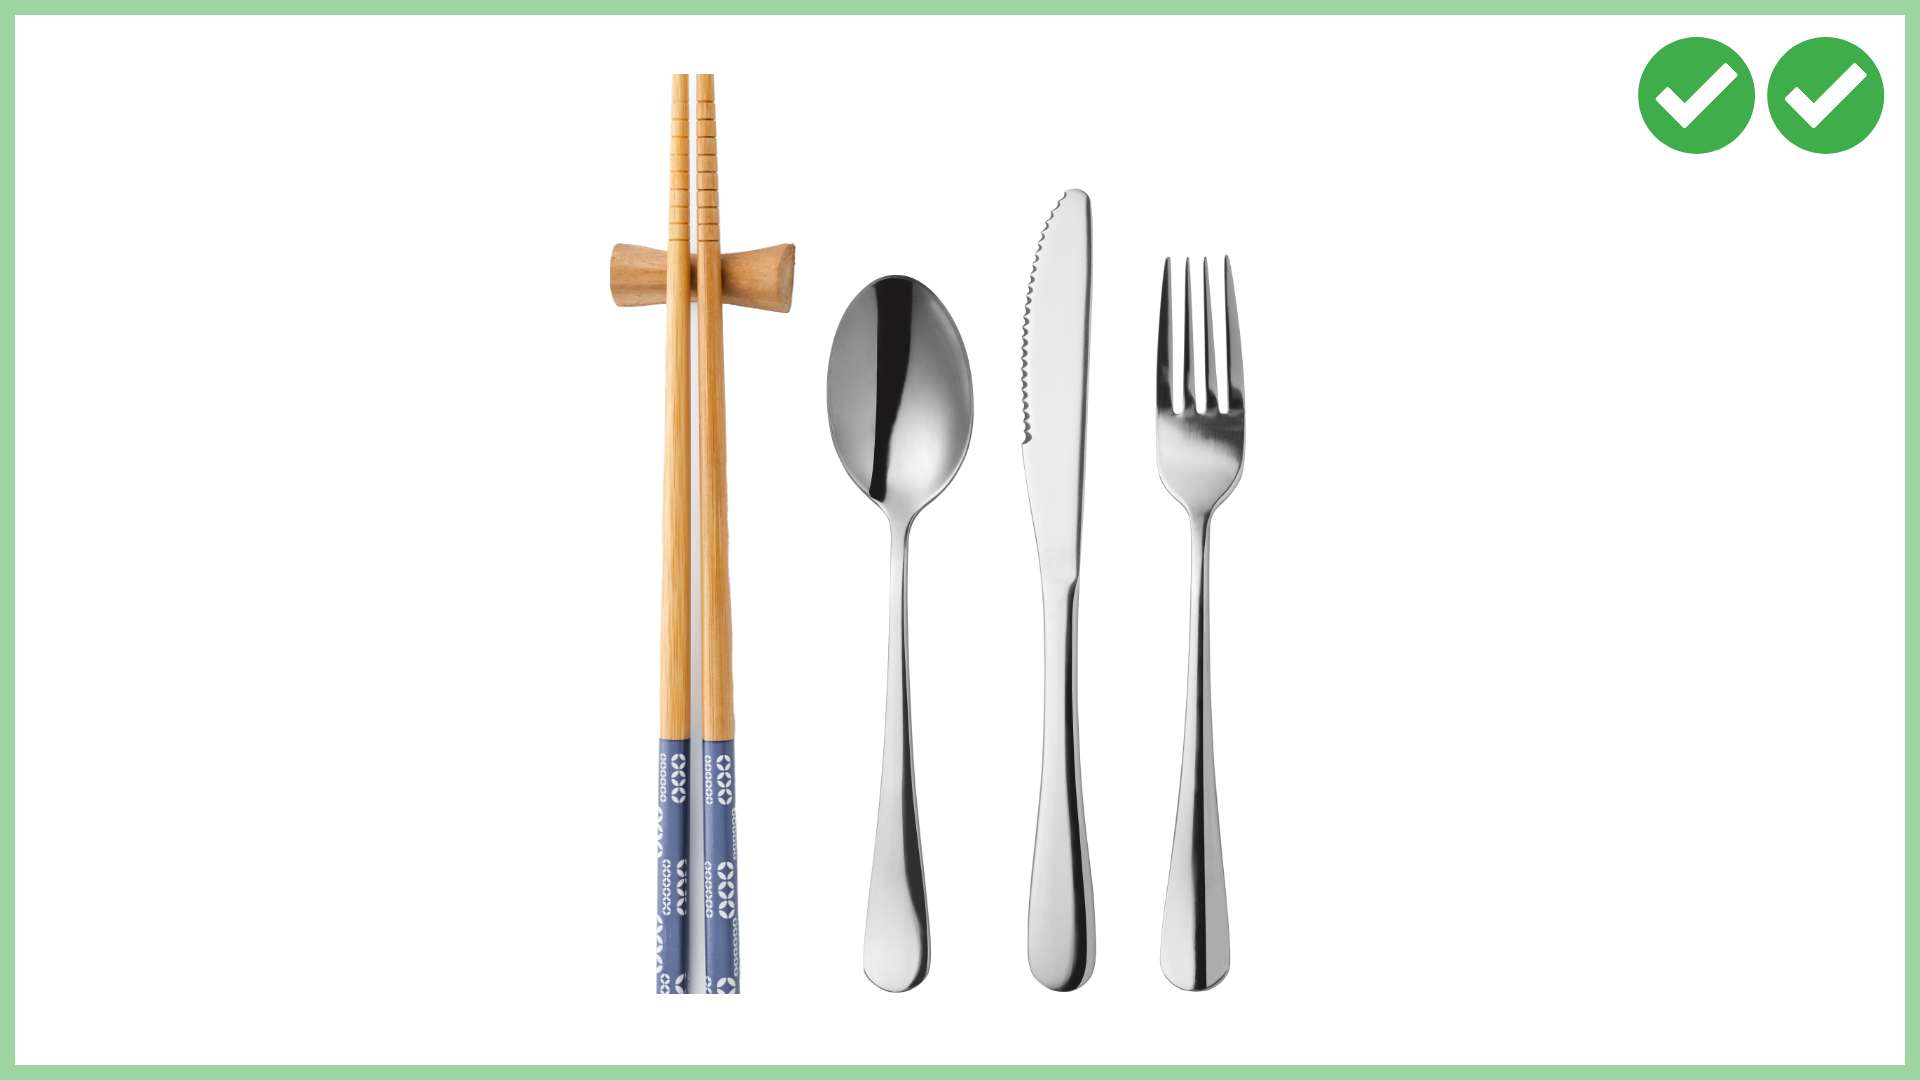 Reusable wooden chopsticks and metal spoon, knife and fork